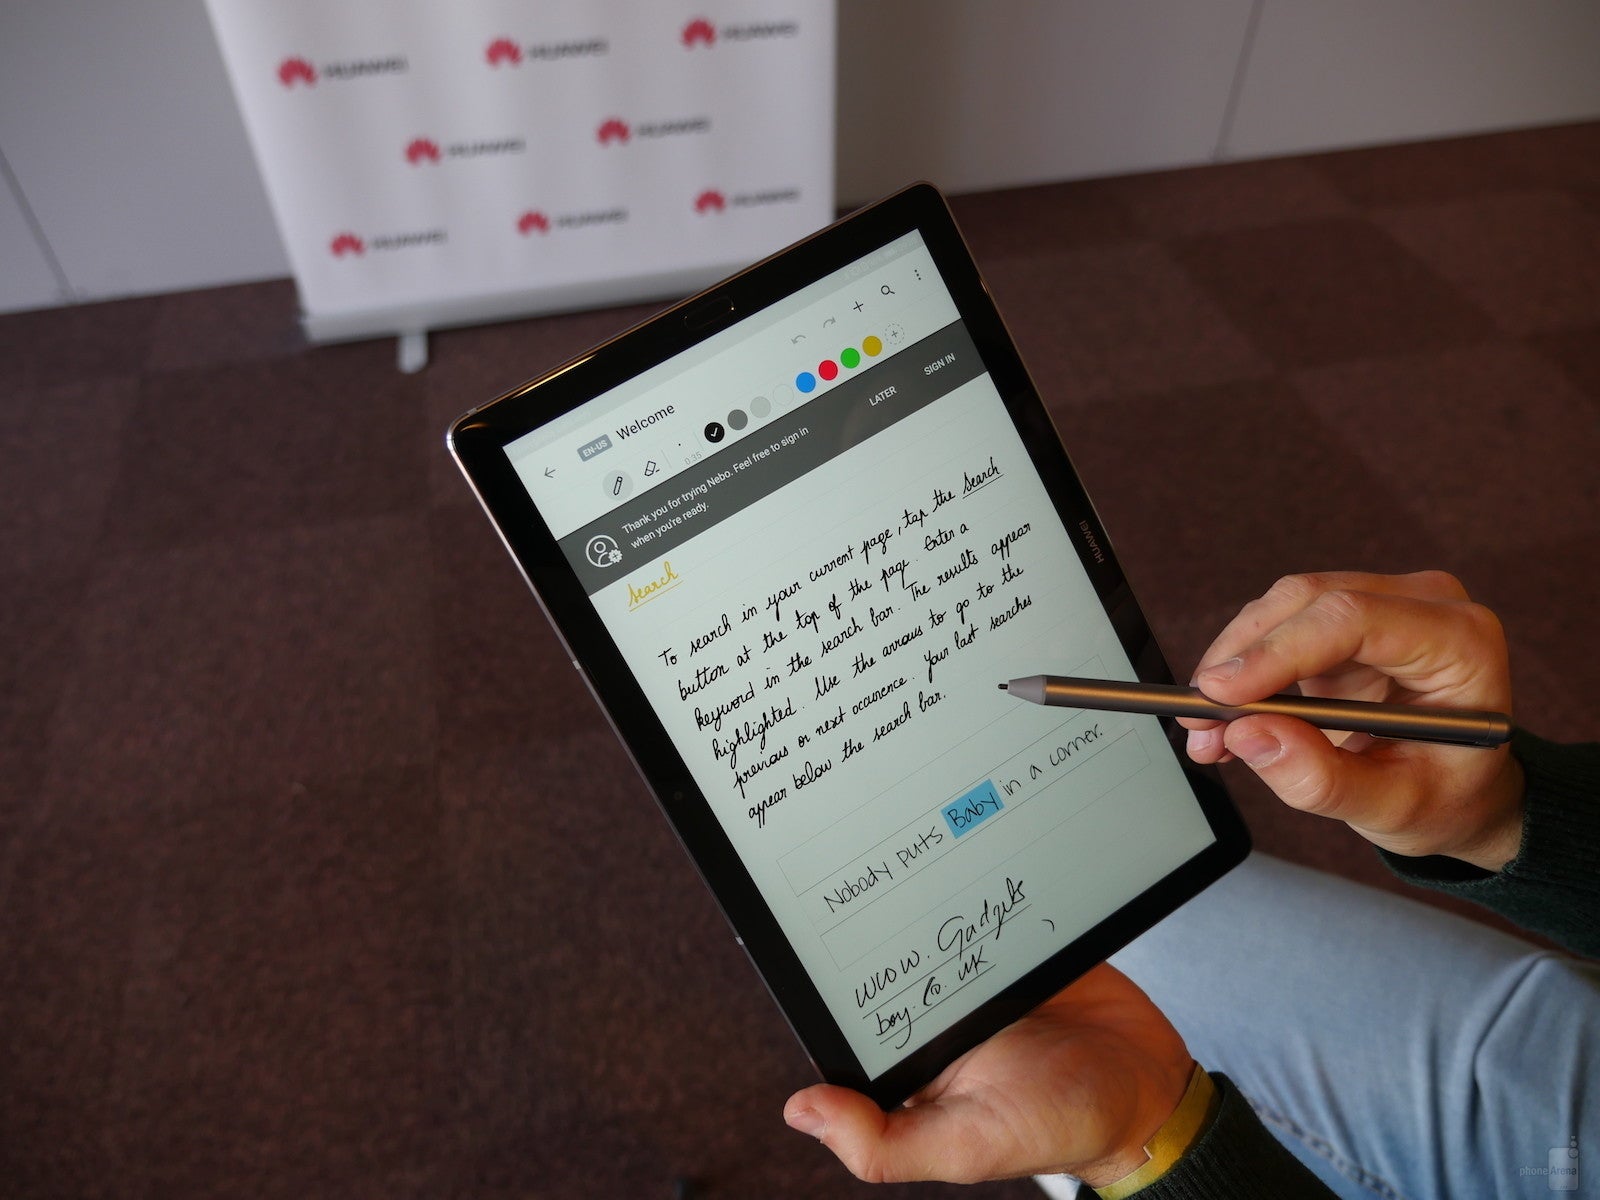 Huawei MediaPad M5 and M5 Pro Hands-On: Are Android tablets on the comeback?